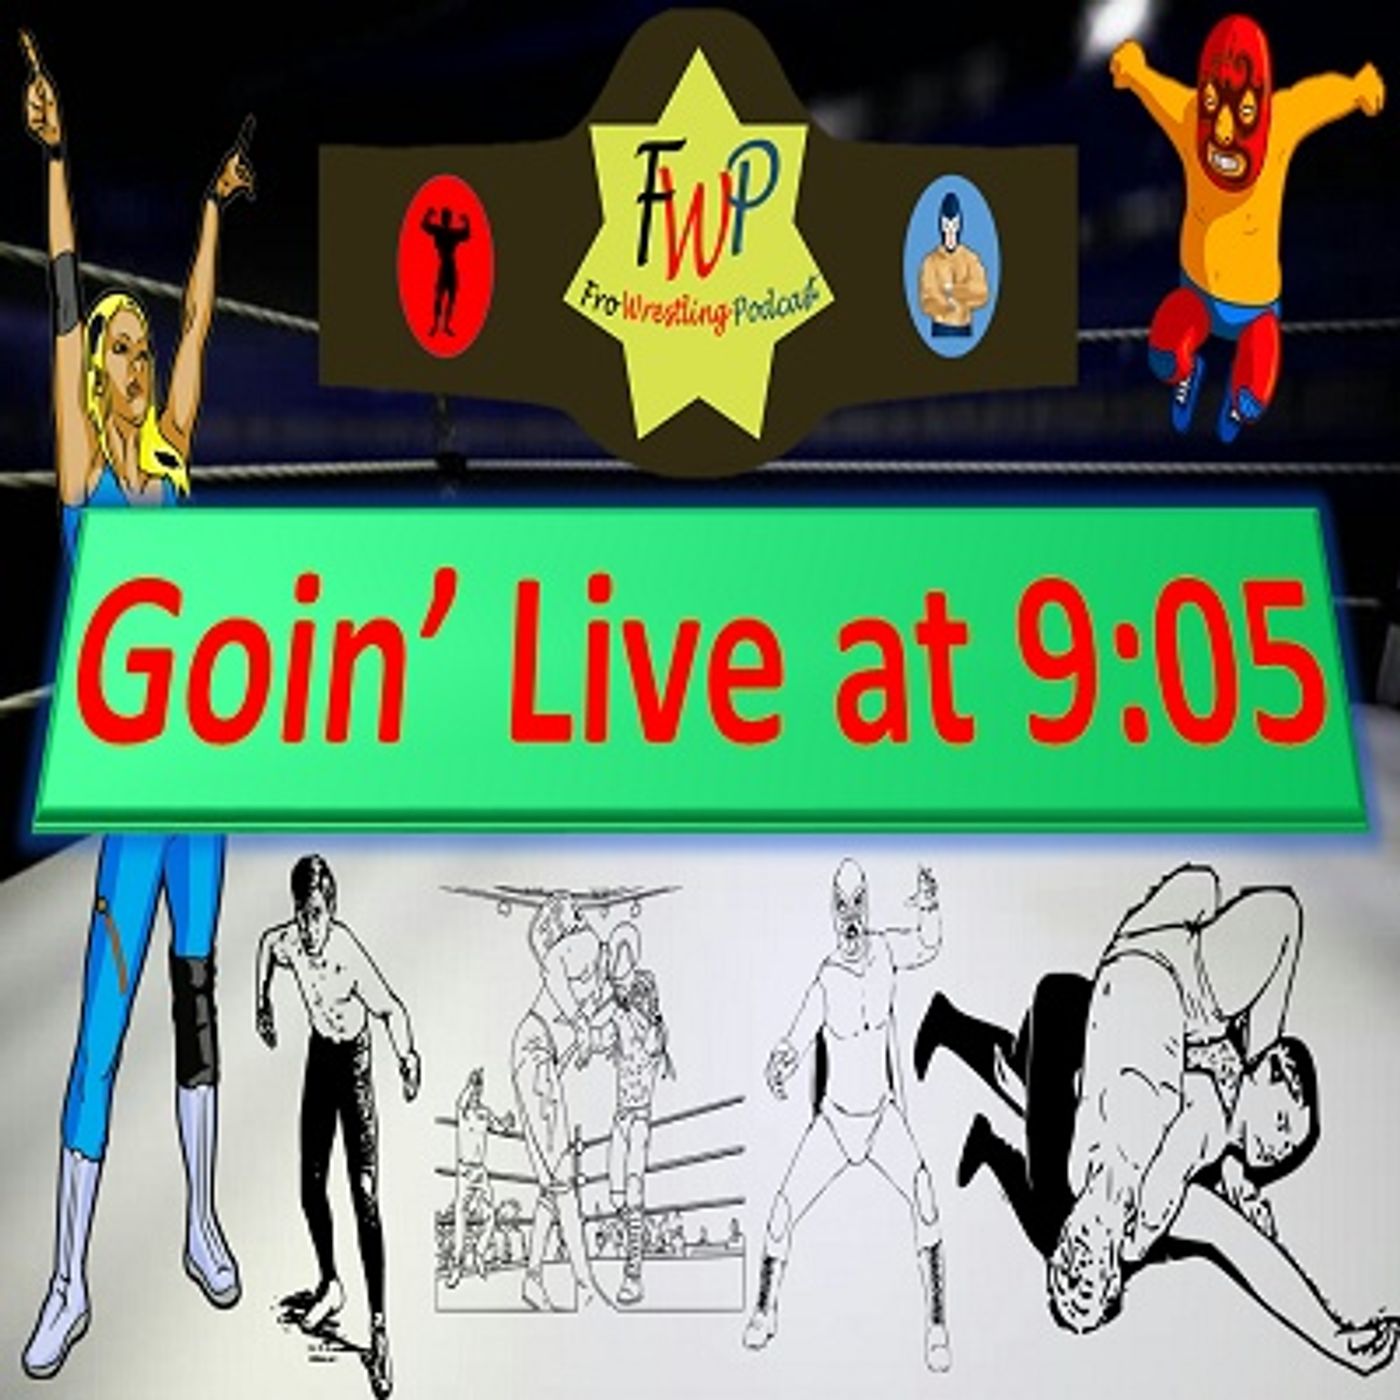 Goin Live at 9:05 - No Mercy News and Ronda Rousey in WWE?